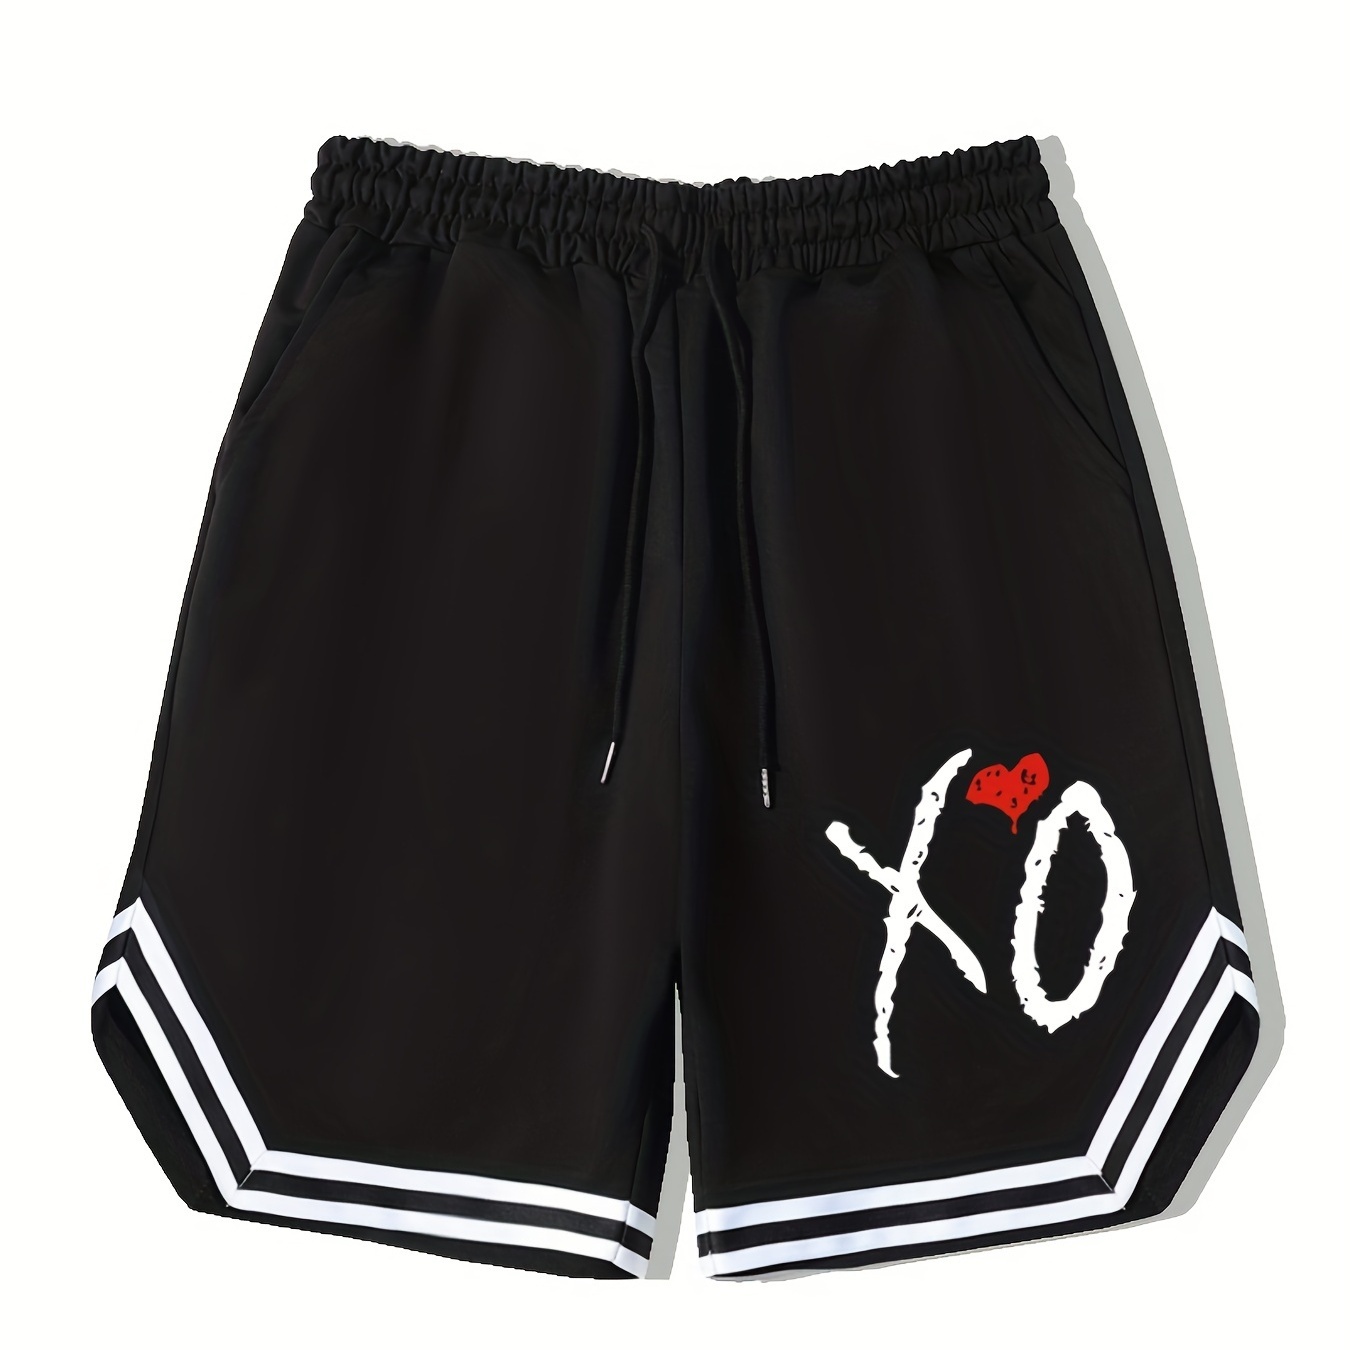 

Men's Streetwear Shorts, "xo" Graphic Drawstring Stretchy Short Pants For Workout Fitness, Summer Clothings Men's Fashion Outfits